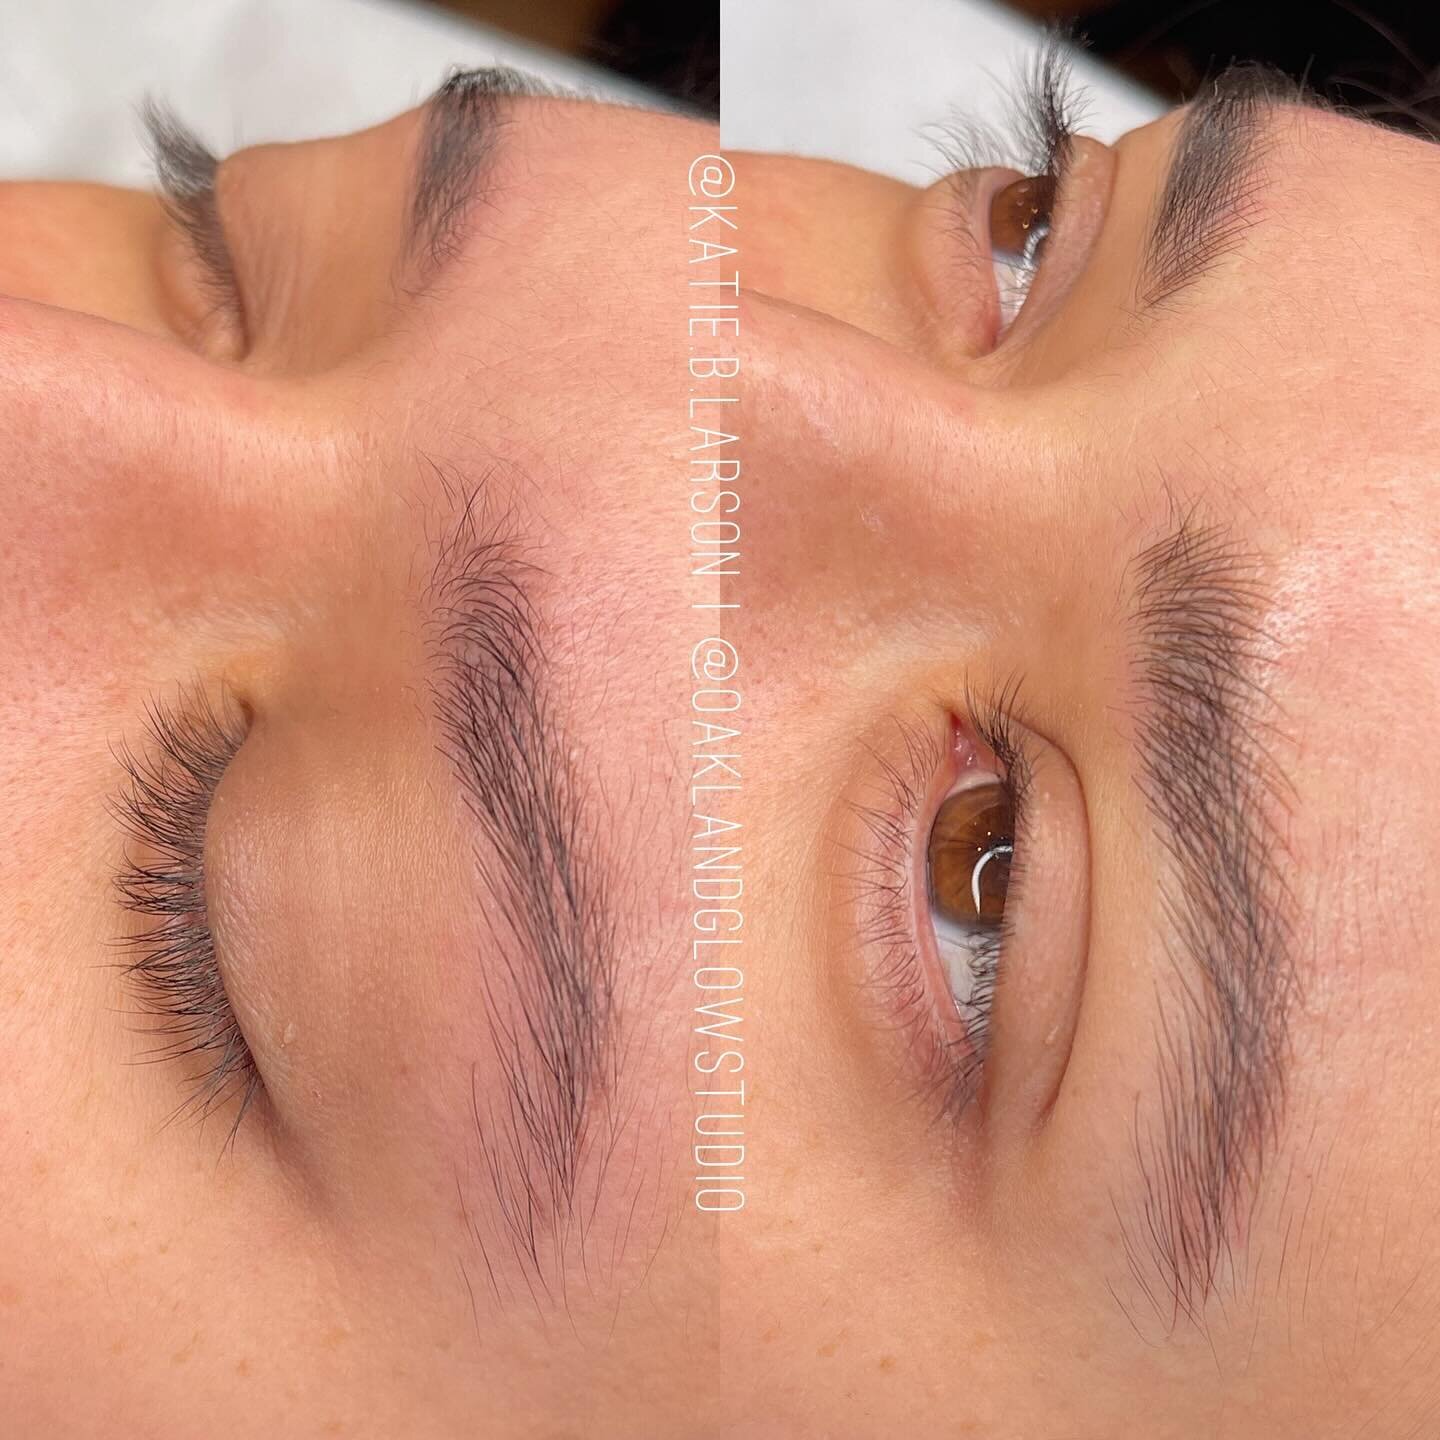 BEFORE + AFTER 
Swipe 👉🏼 for another view, which is your fav? I can never decide what angle I love more 🤤 

This was an &ldquo;annual&rdquo; microblading refresh, previous work by me ✨ As you can see her tattoo faded out beautifully, no residual p